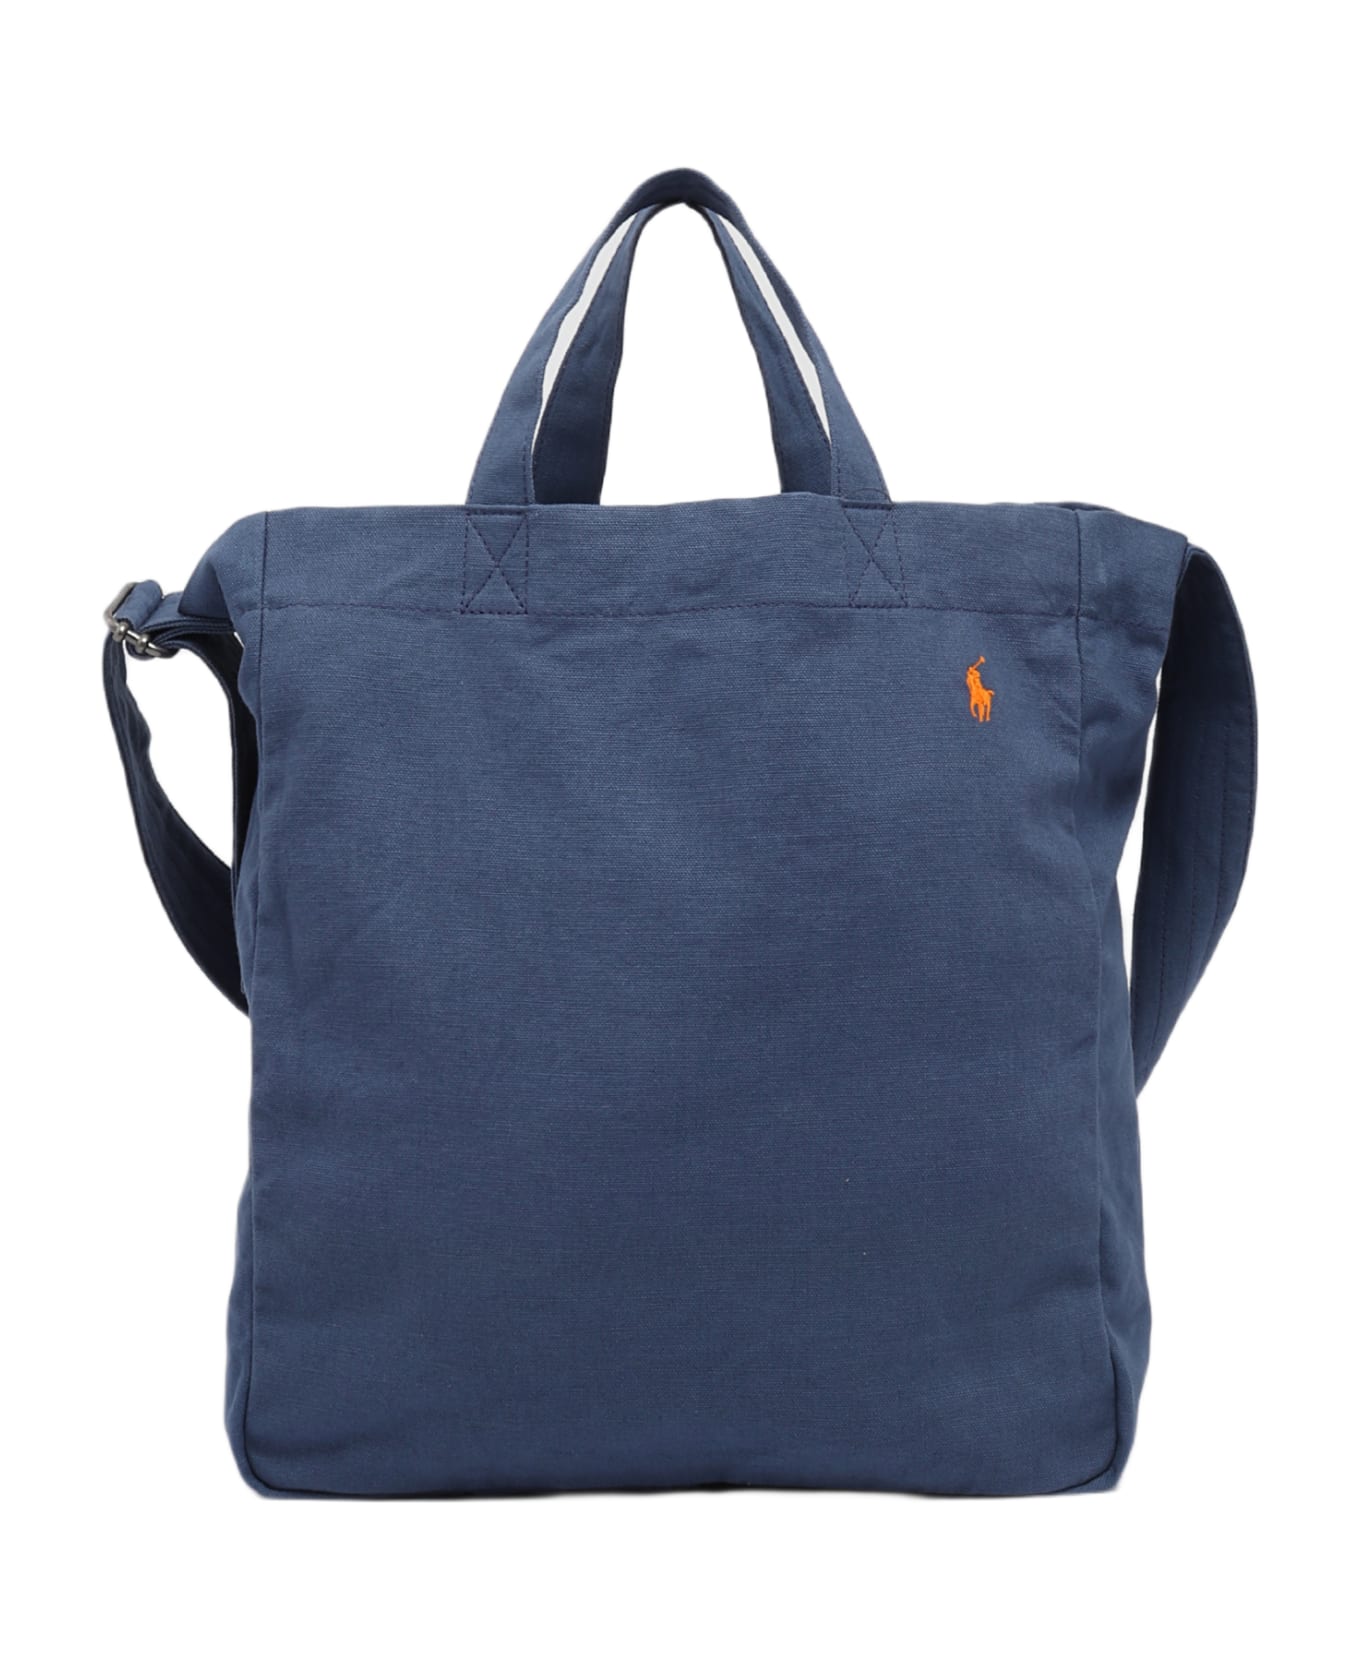 Polo Ralph Lauren Tote Large Canvas Tote - INDACO トートバッグ